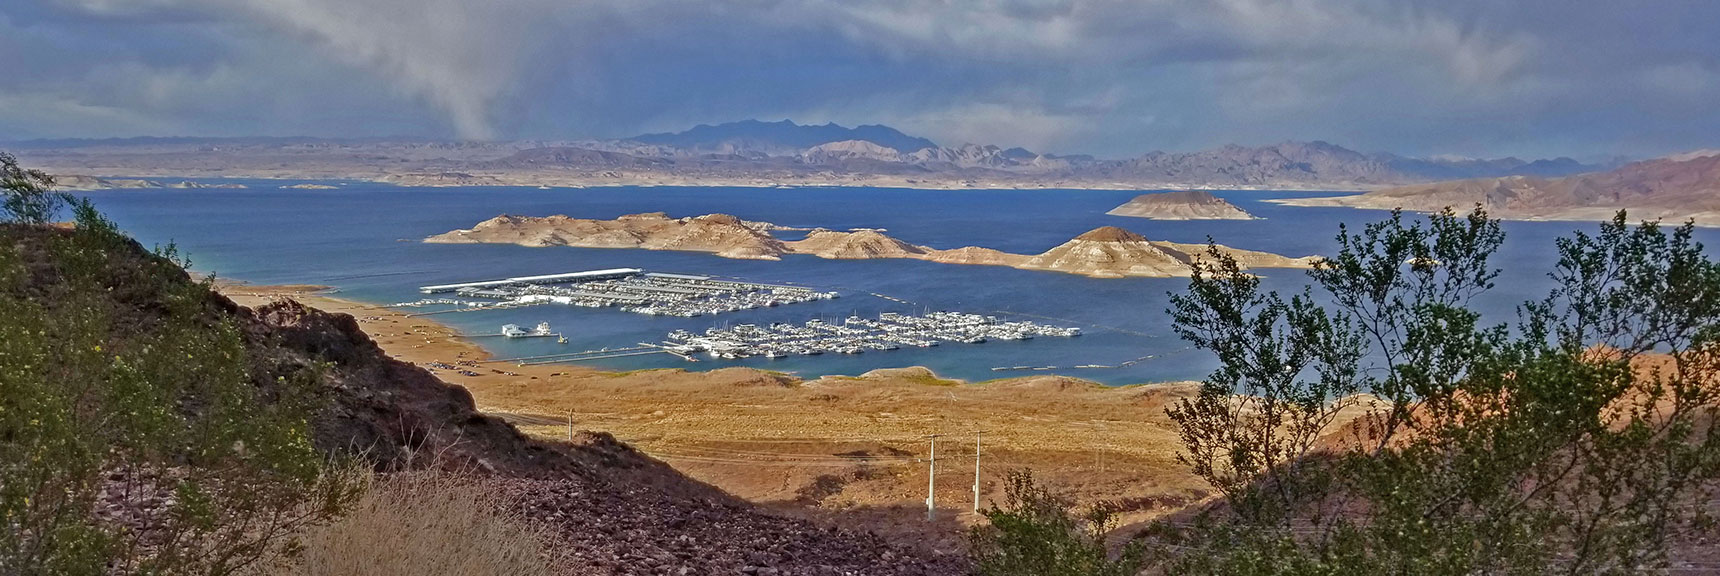 Marina and Islands in Lake Mead. Muddy Mountains Center Background | Historic Railroad Trail | Lake Mead National Recreation Area, Nevada